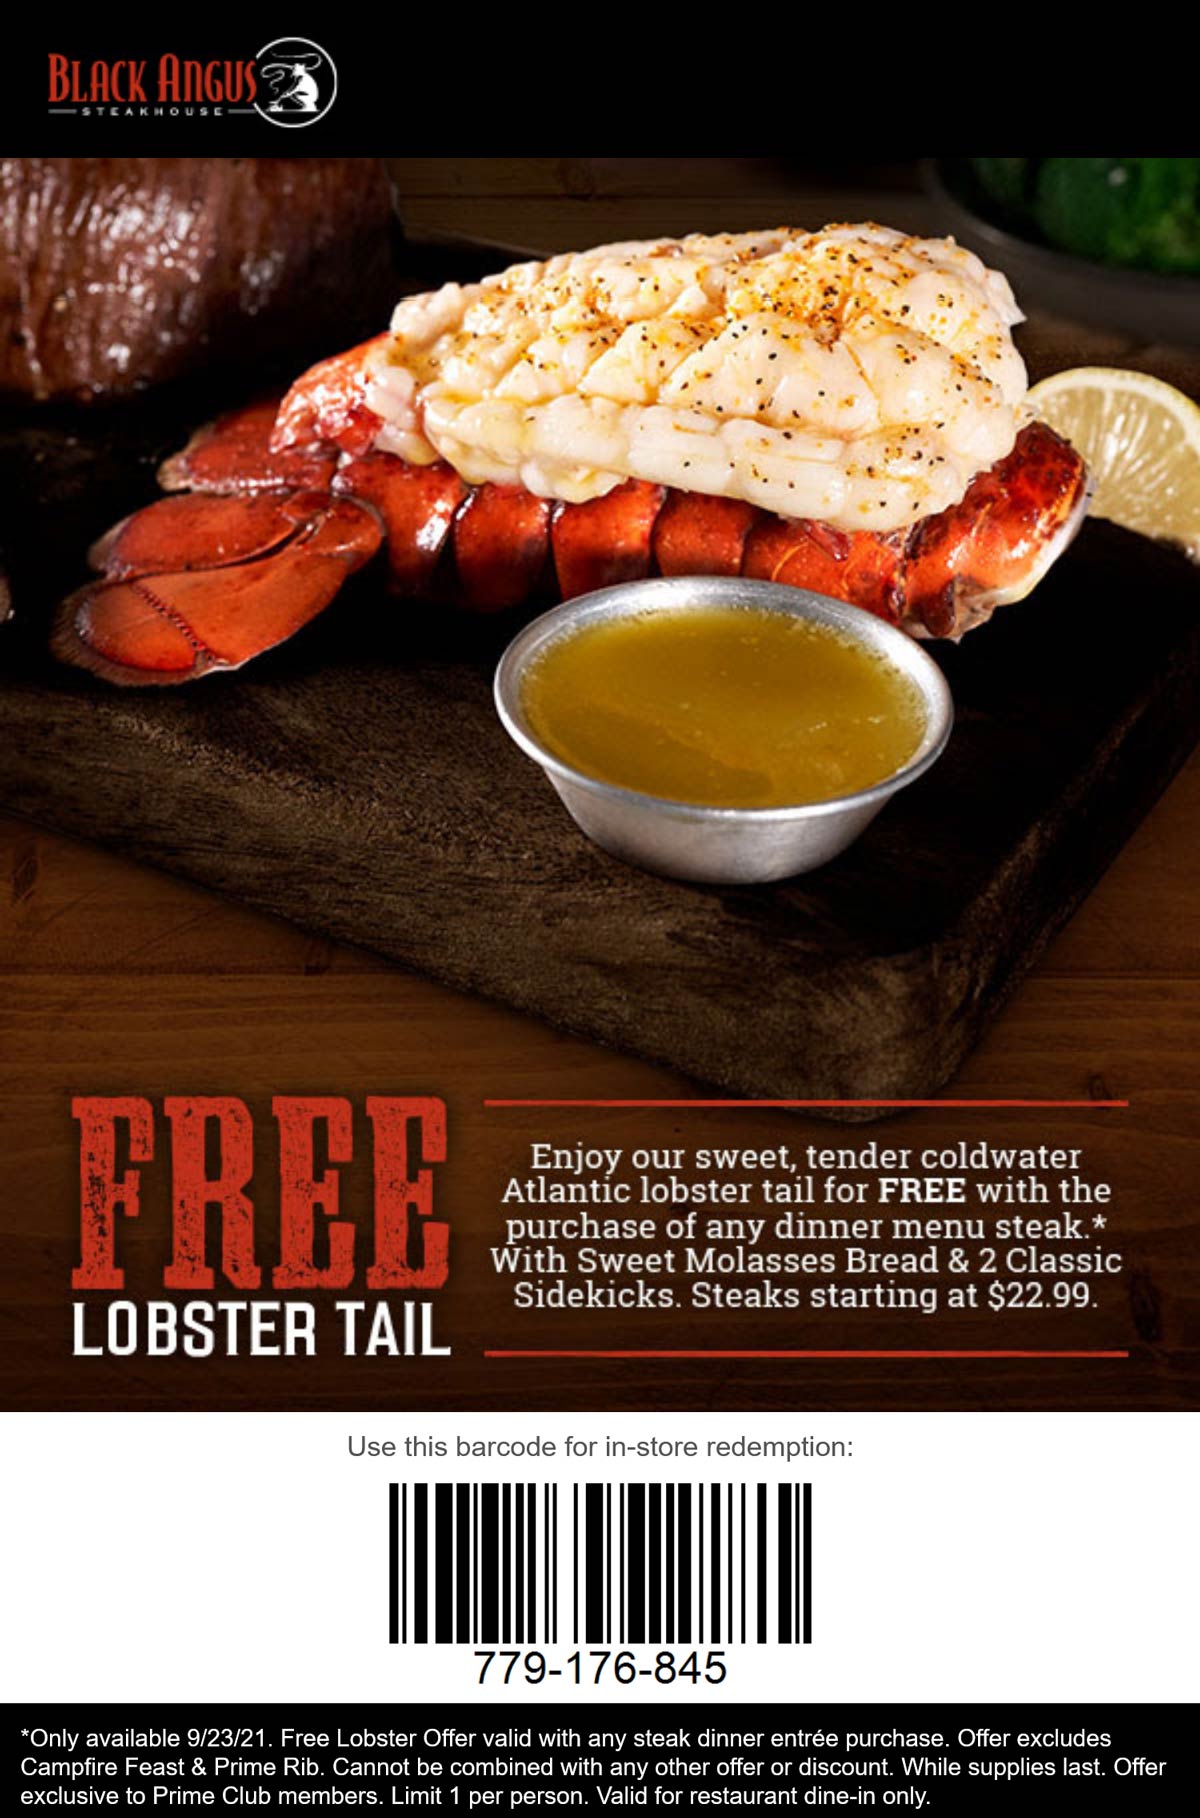 Black Angus restaurants Coupon  Free lobster tail with any steak dinner today at Black Angus steakhouse #blackangus 